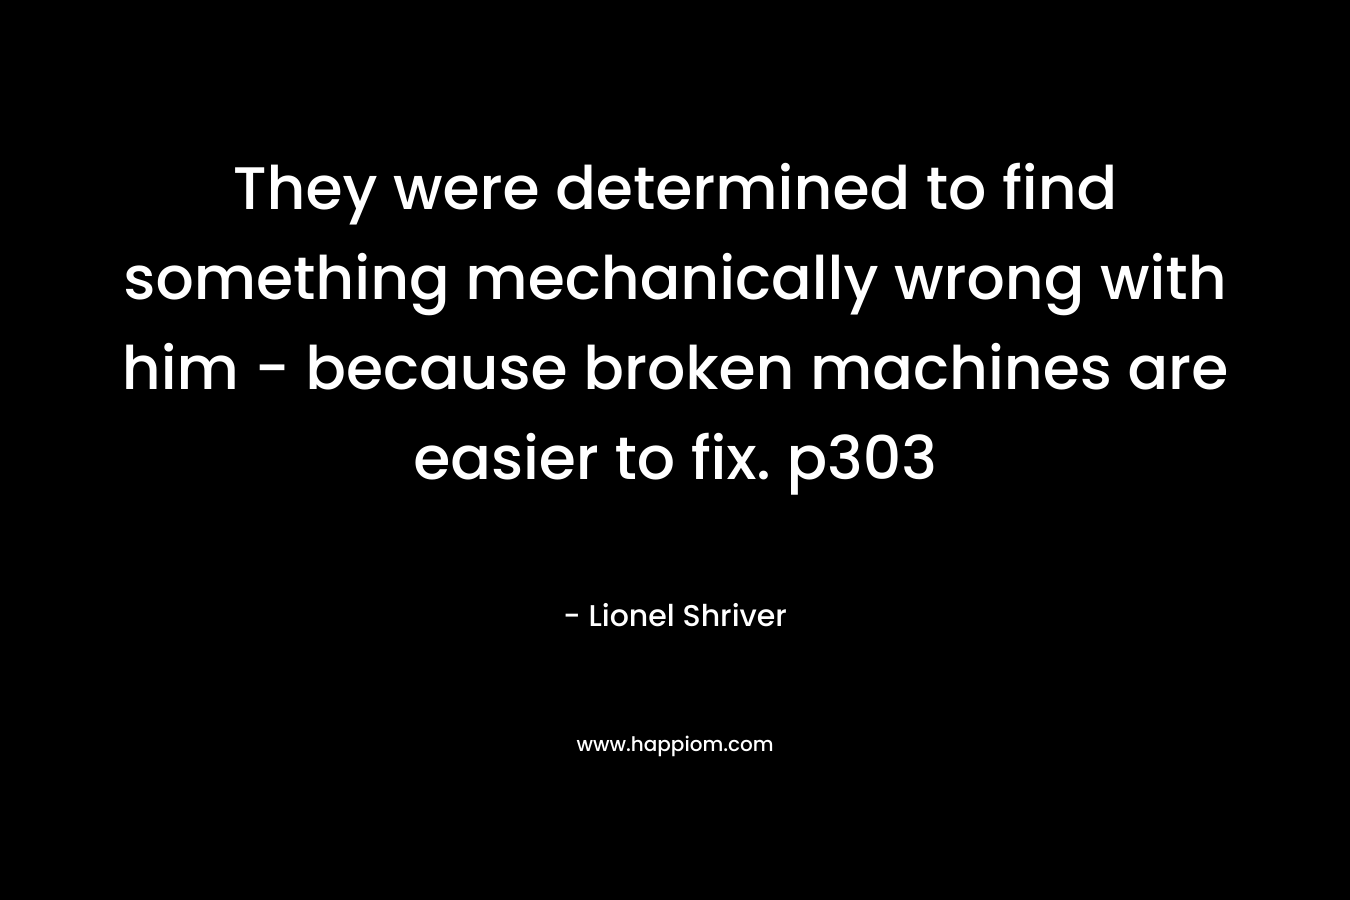 They were determined to find something mechanically wrong with him - because broken machines are easier to fix. p303